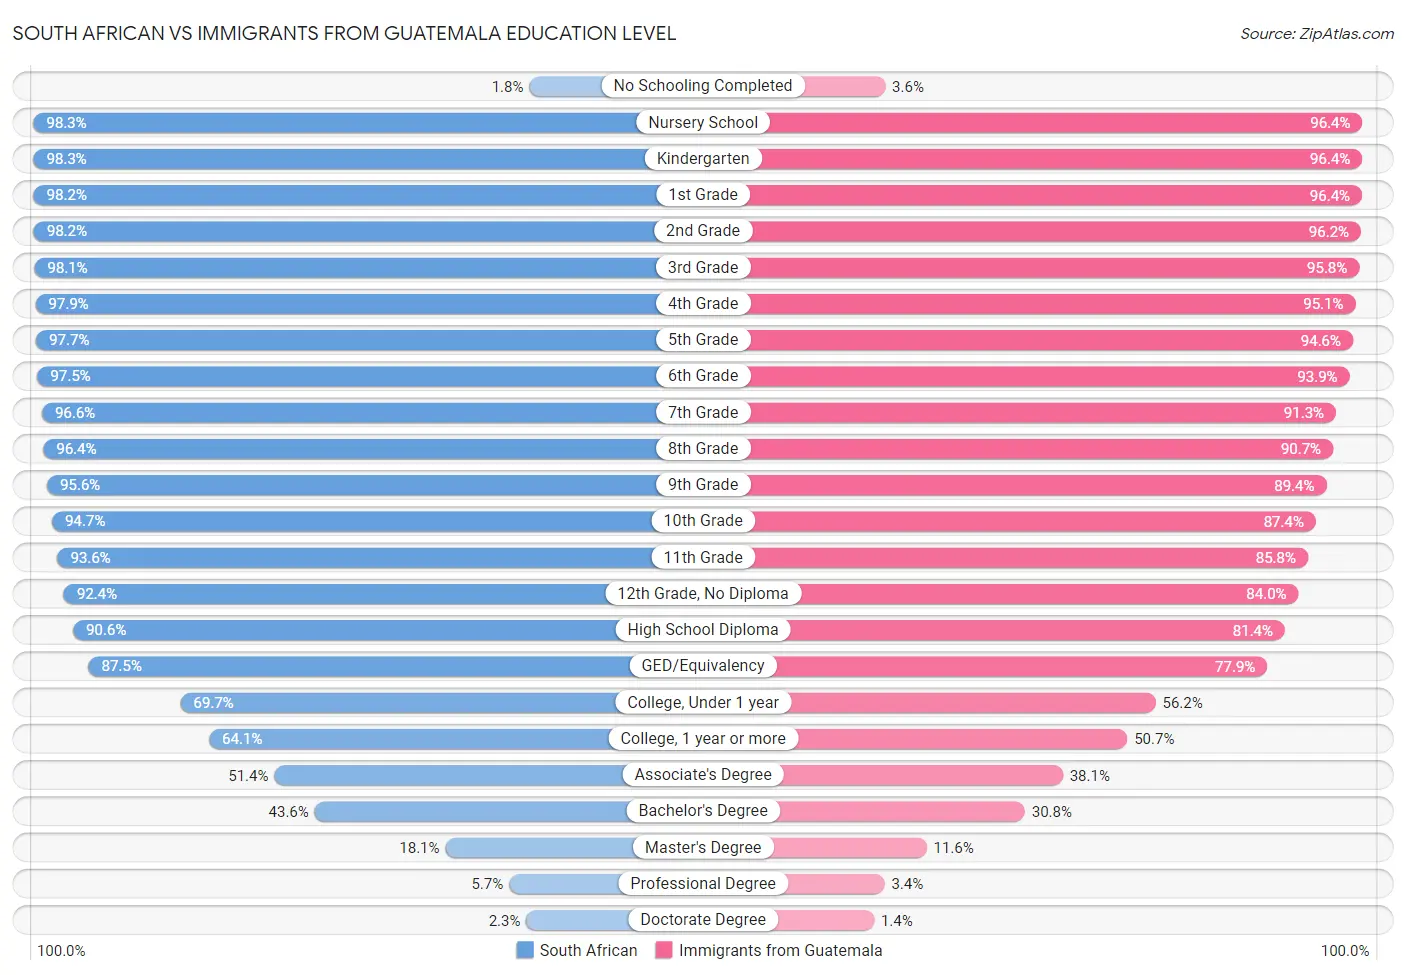 South African vs Immigrants from Guatemala Education Level